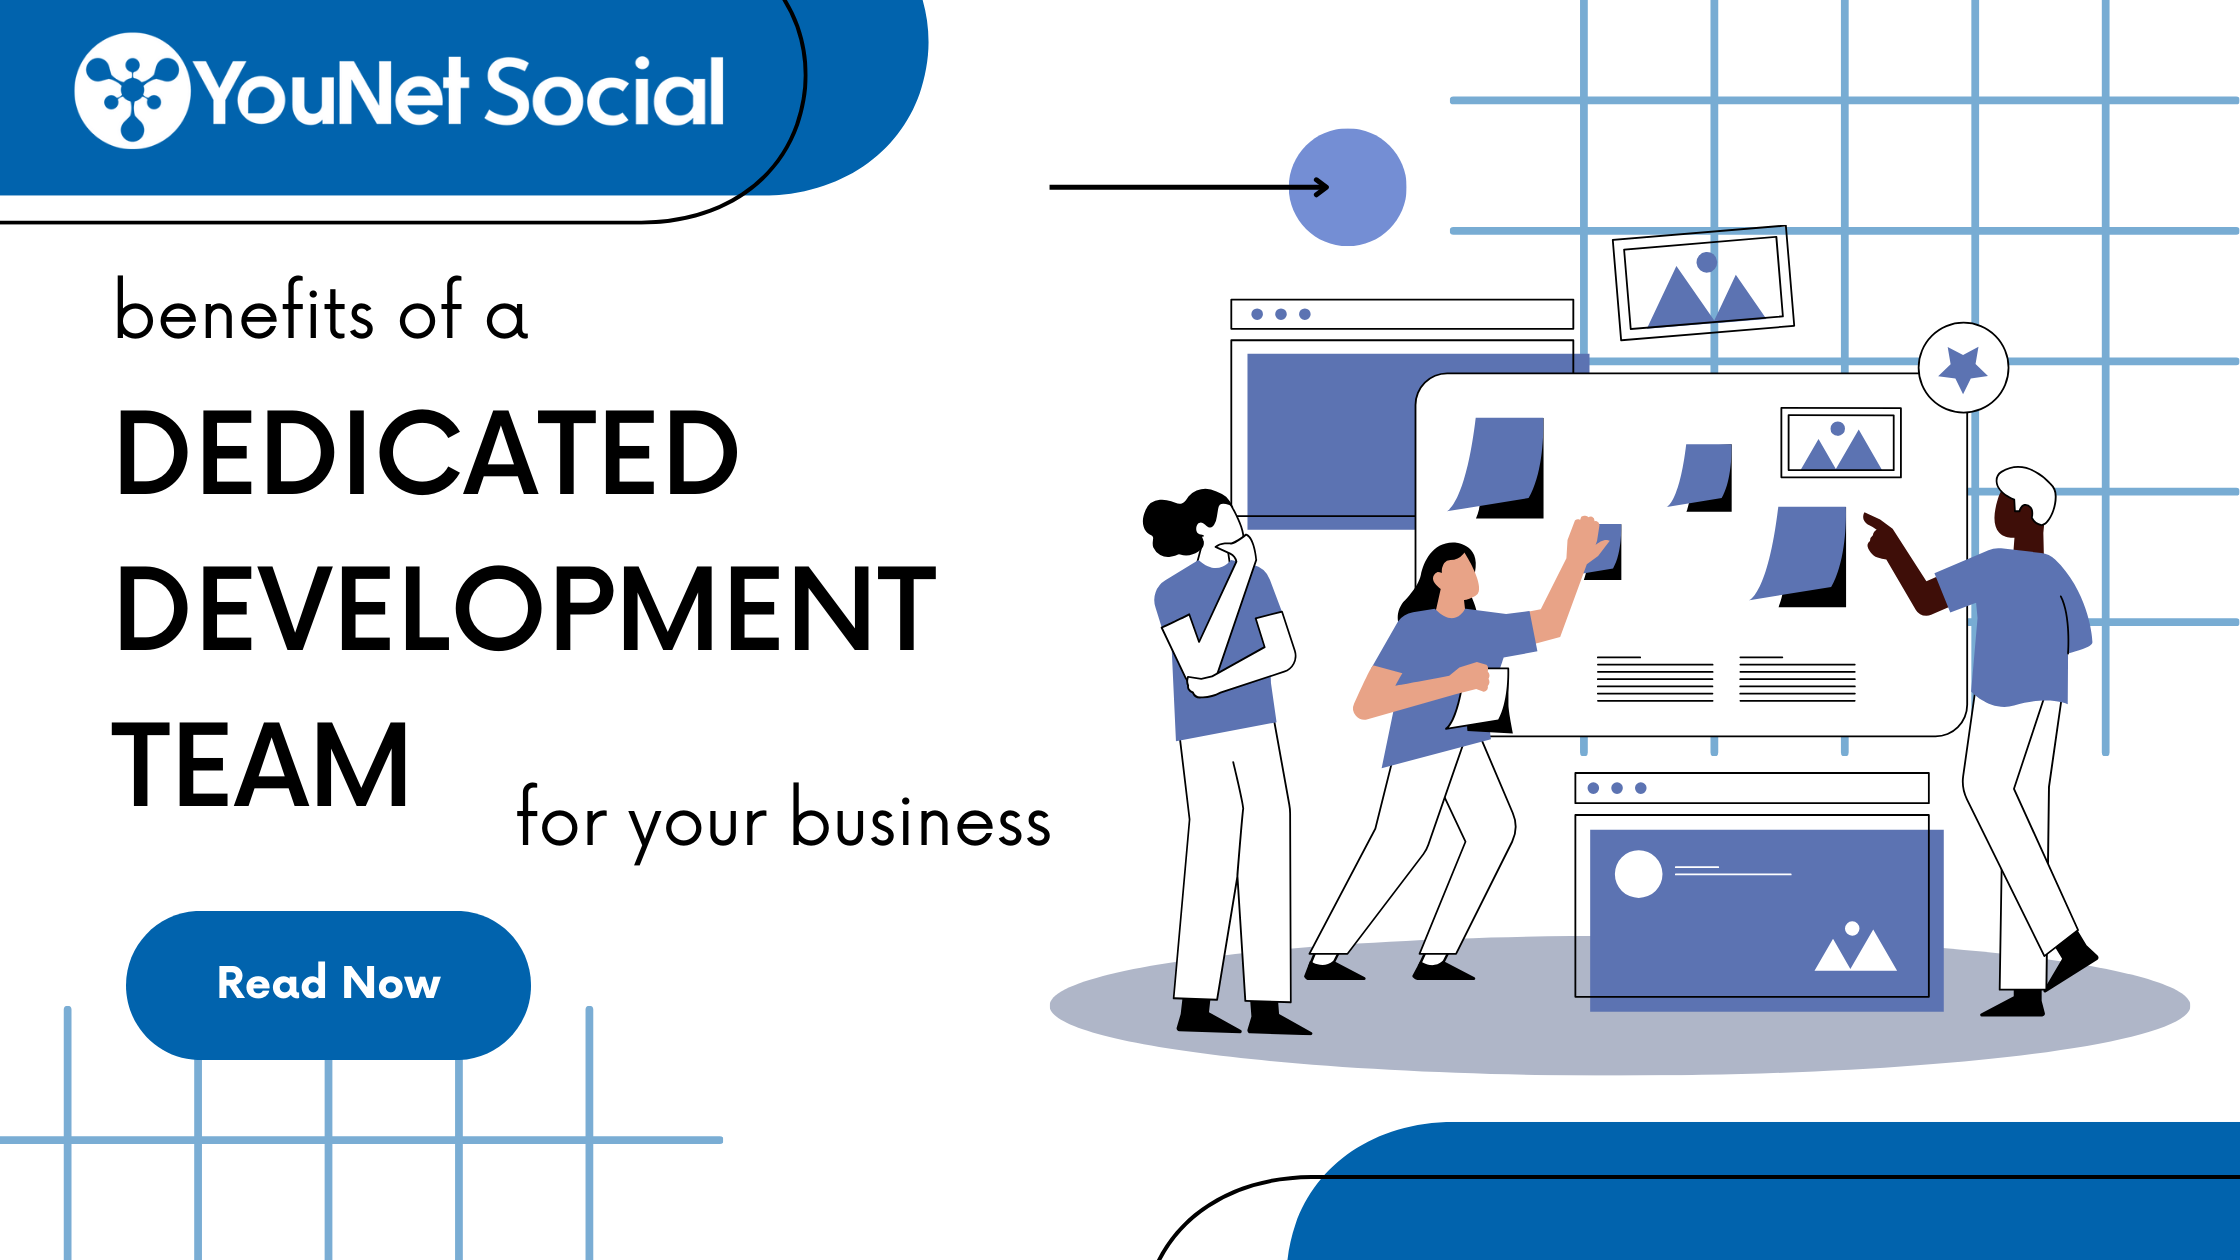 A dedicated development team and its benefit for your business